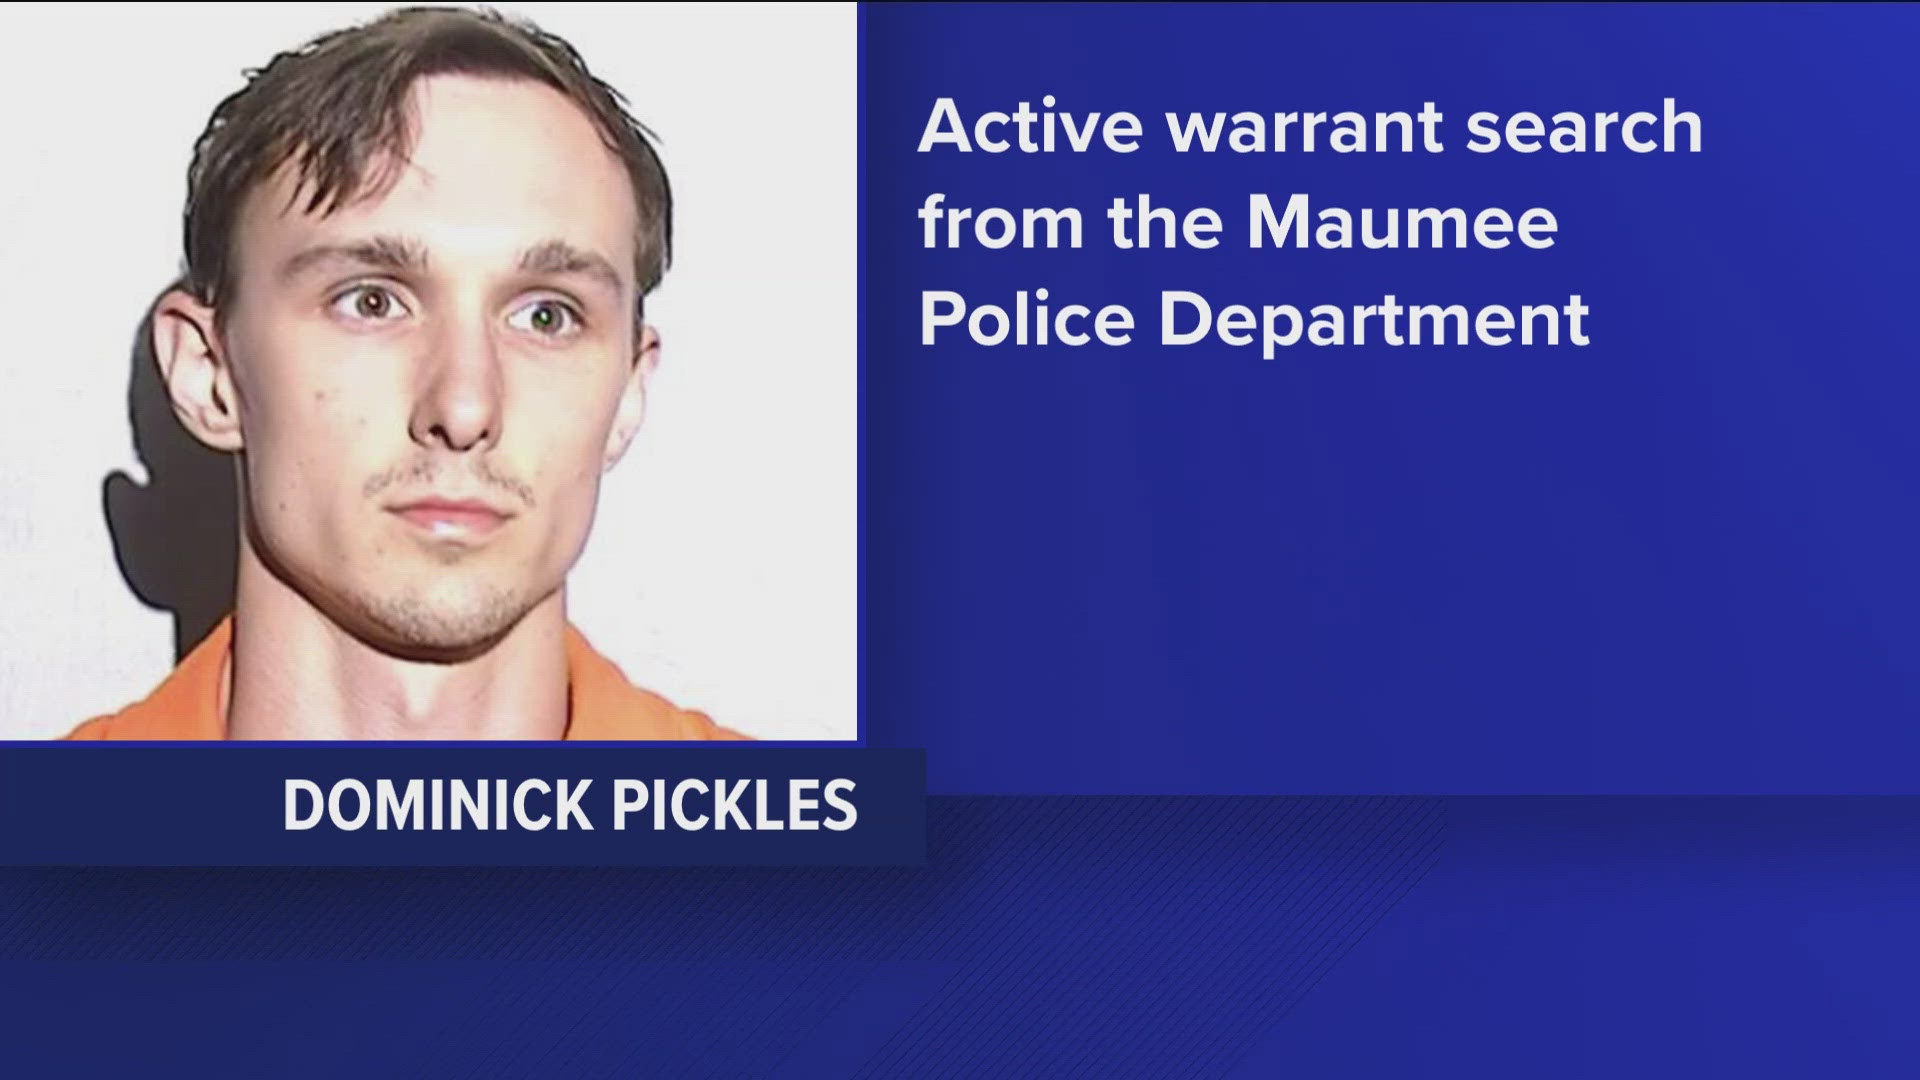 If you see Dominick Pickles, 24, contact your local police or reach out to Maumee police with any tips to: detective@maumee.org.